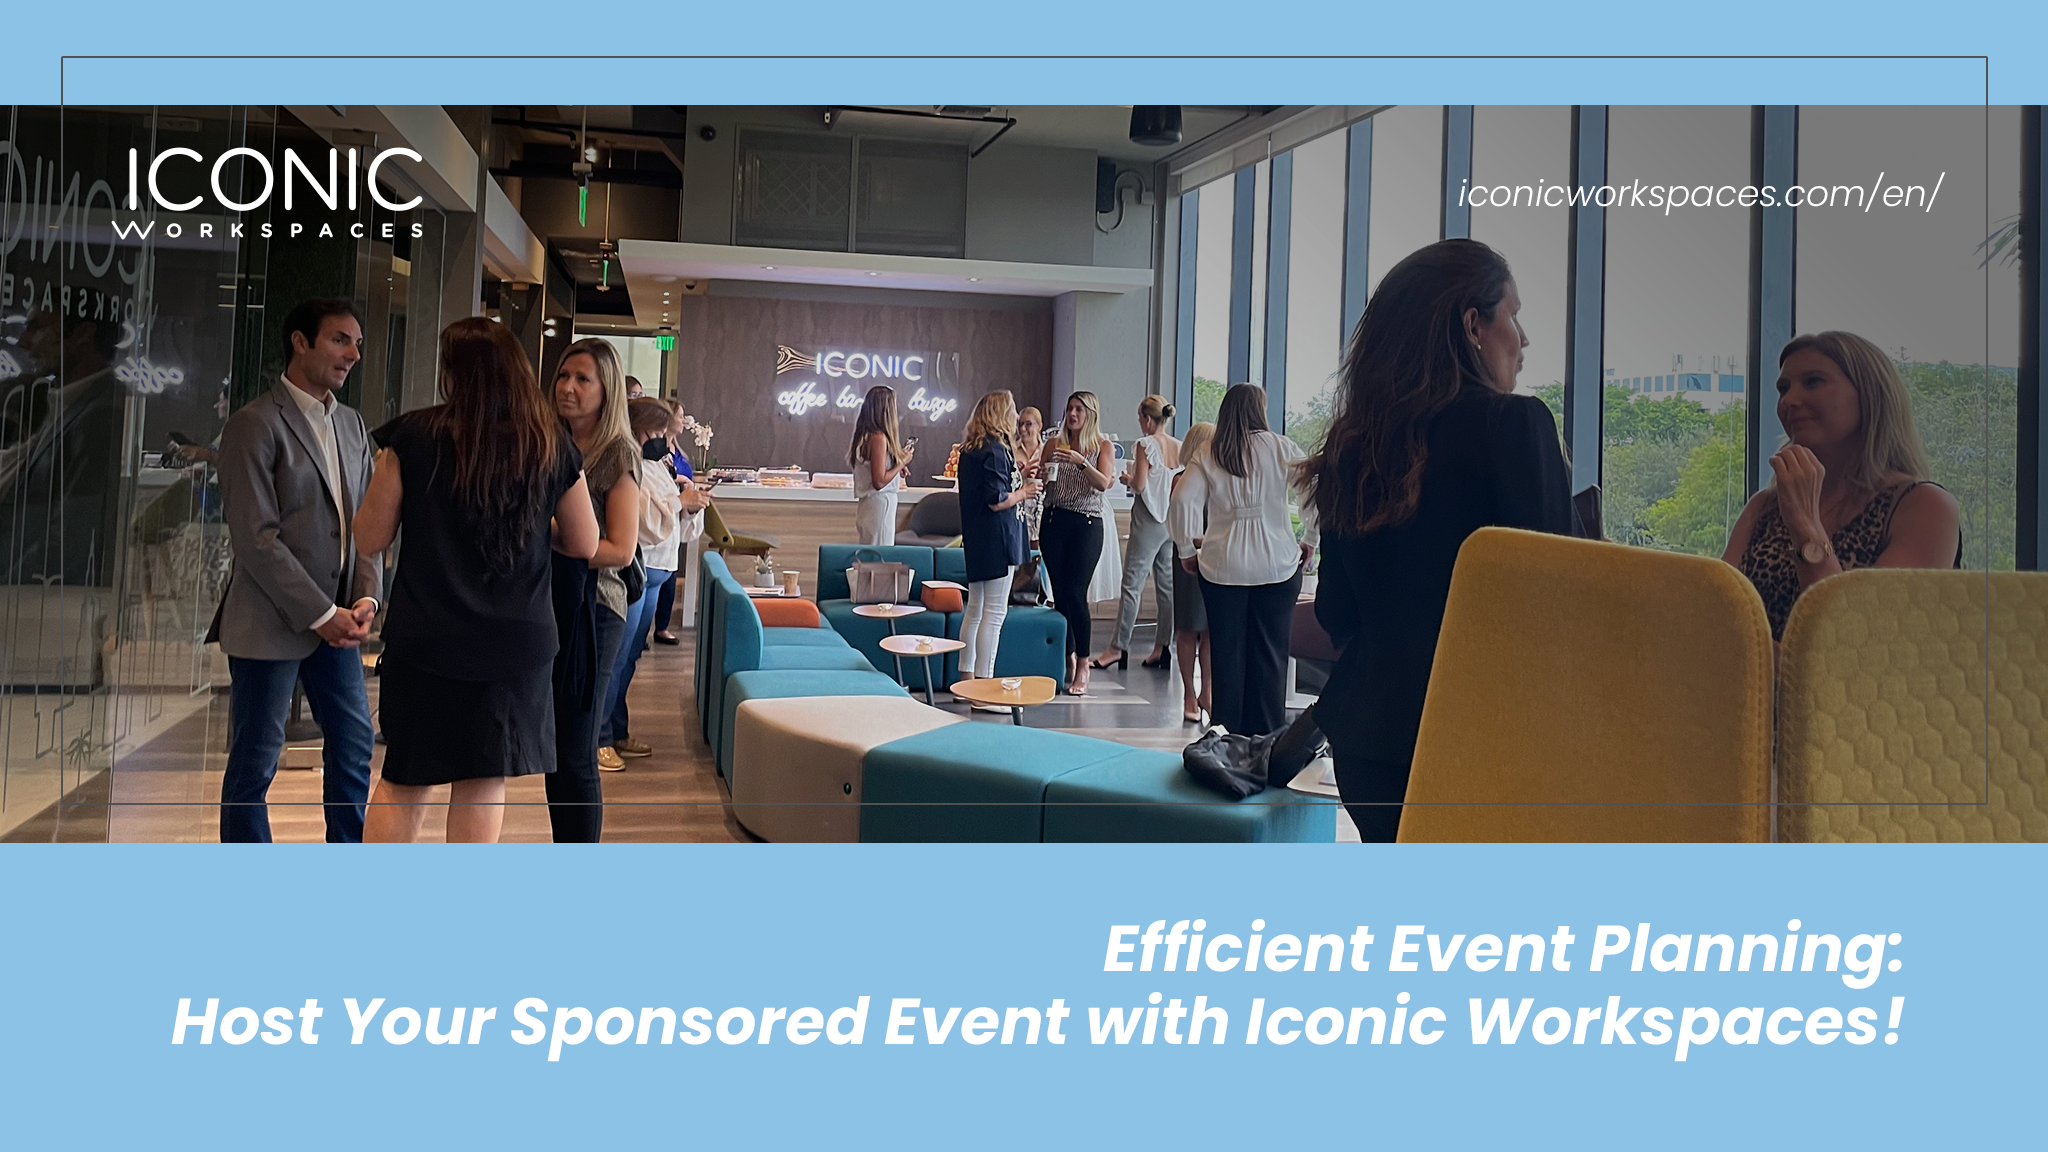 Efficient Event Planning: Host Your Sponsored Event with Iconic Workspaces